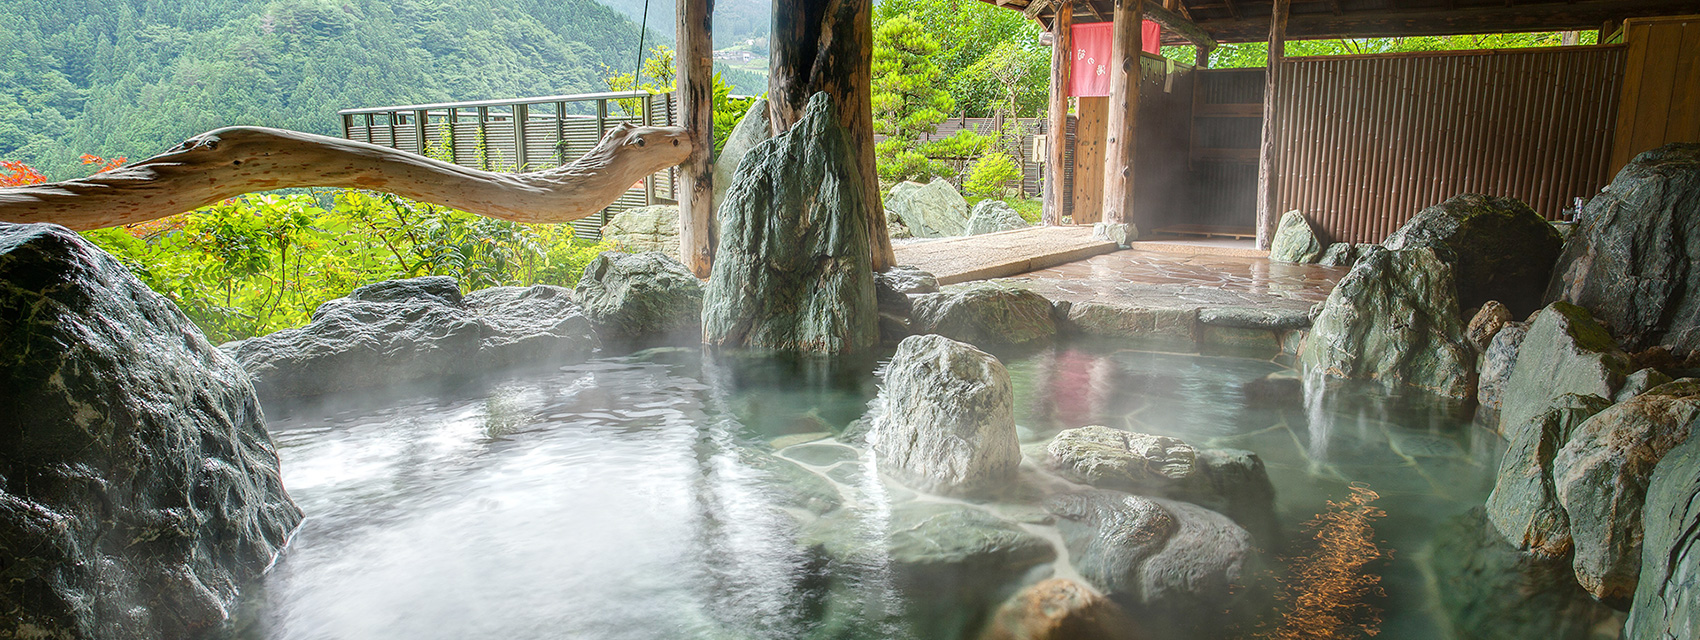 Open-air bath in the mountains